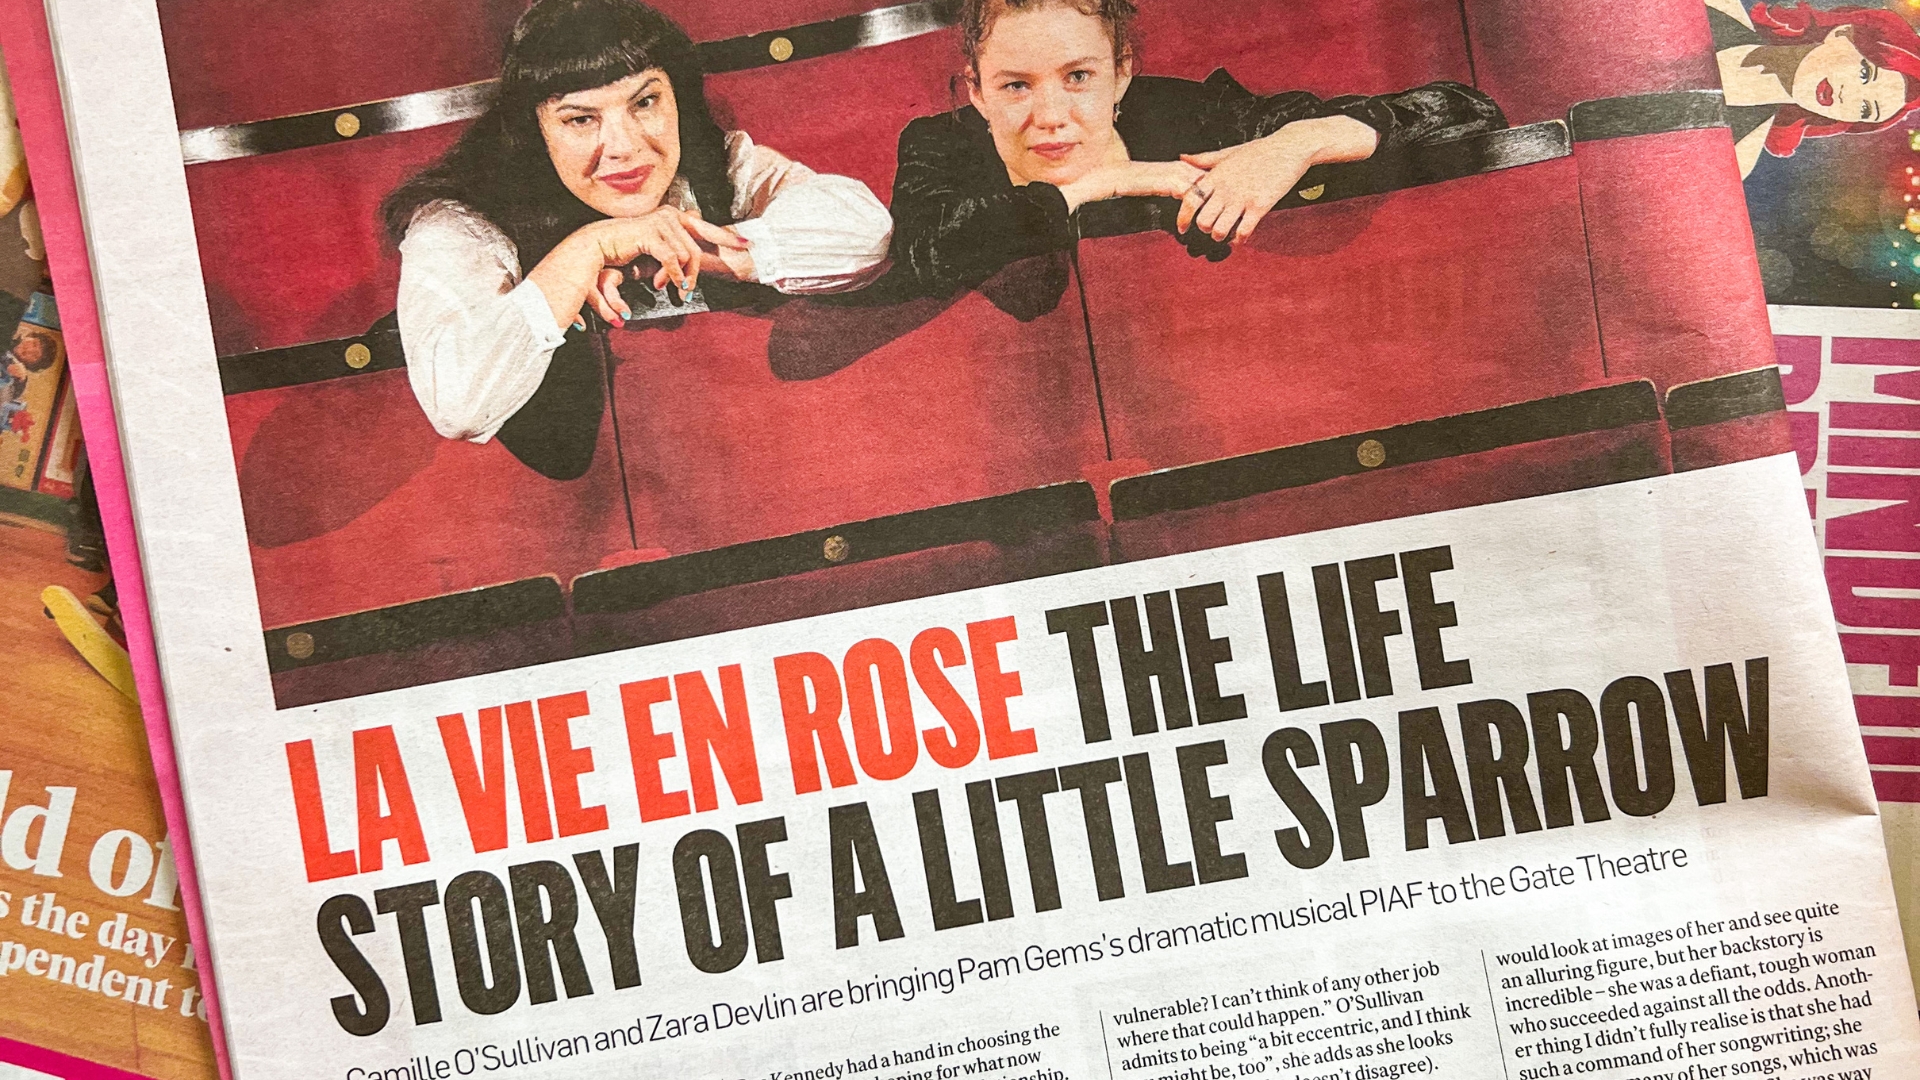 Photo of newspaper spread of Camille O Sullivan and Zara Develin sat side by side in the red seats of the Gate Theatre auditorium.